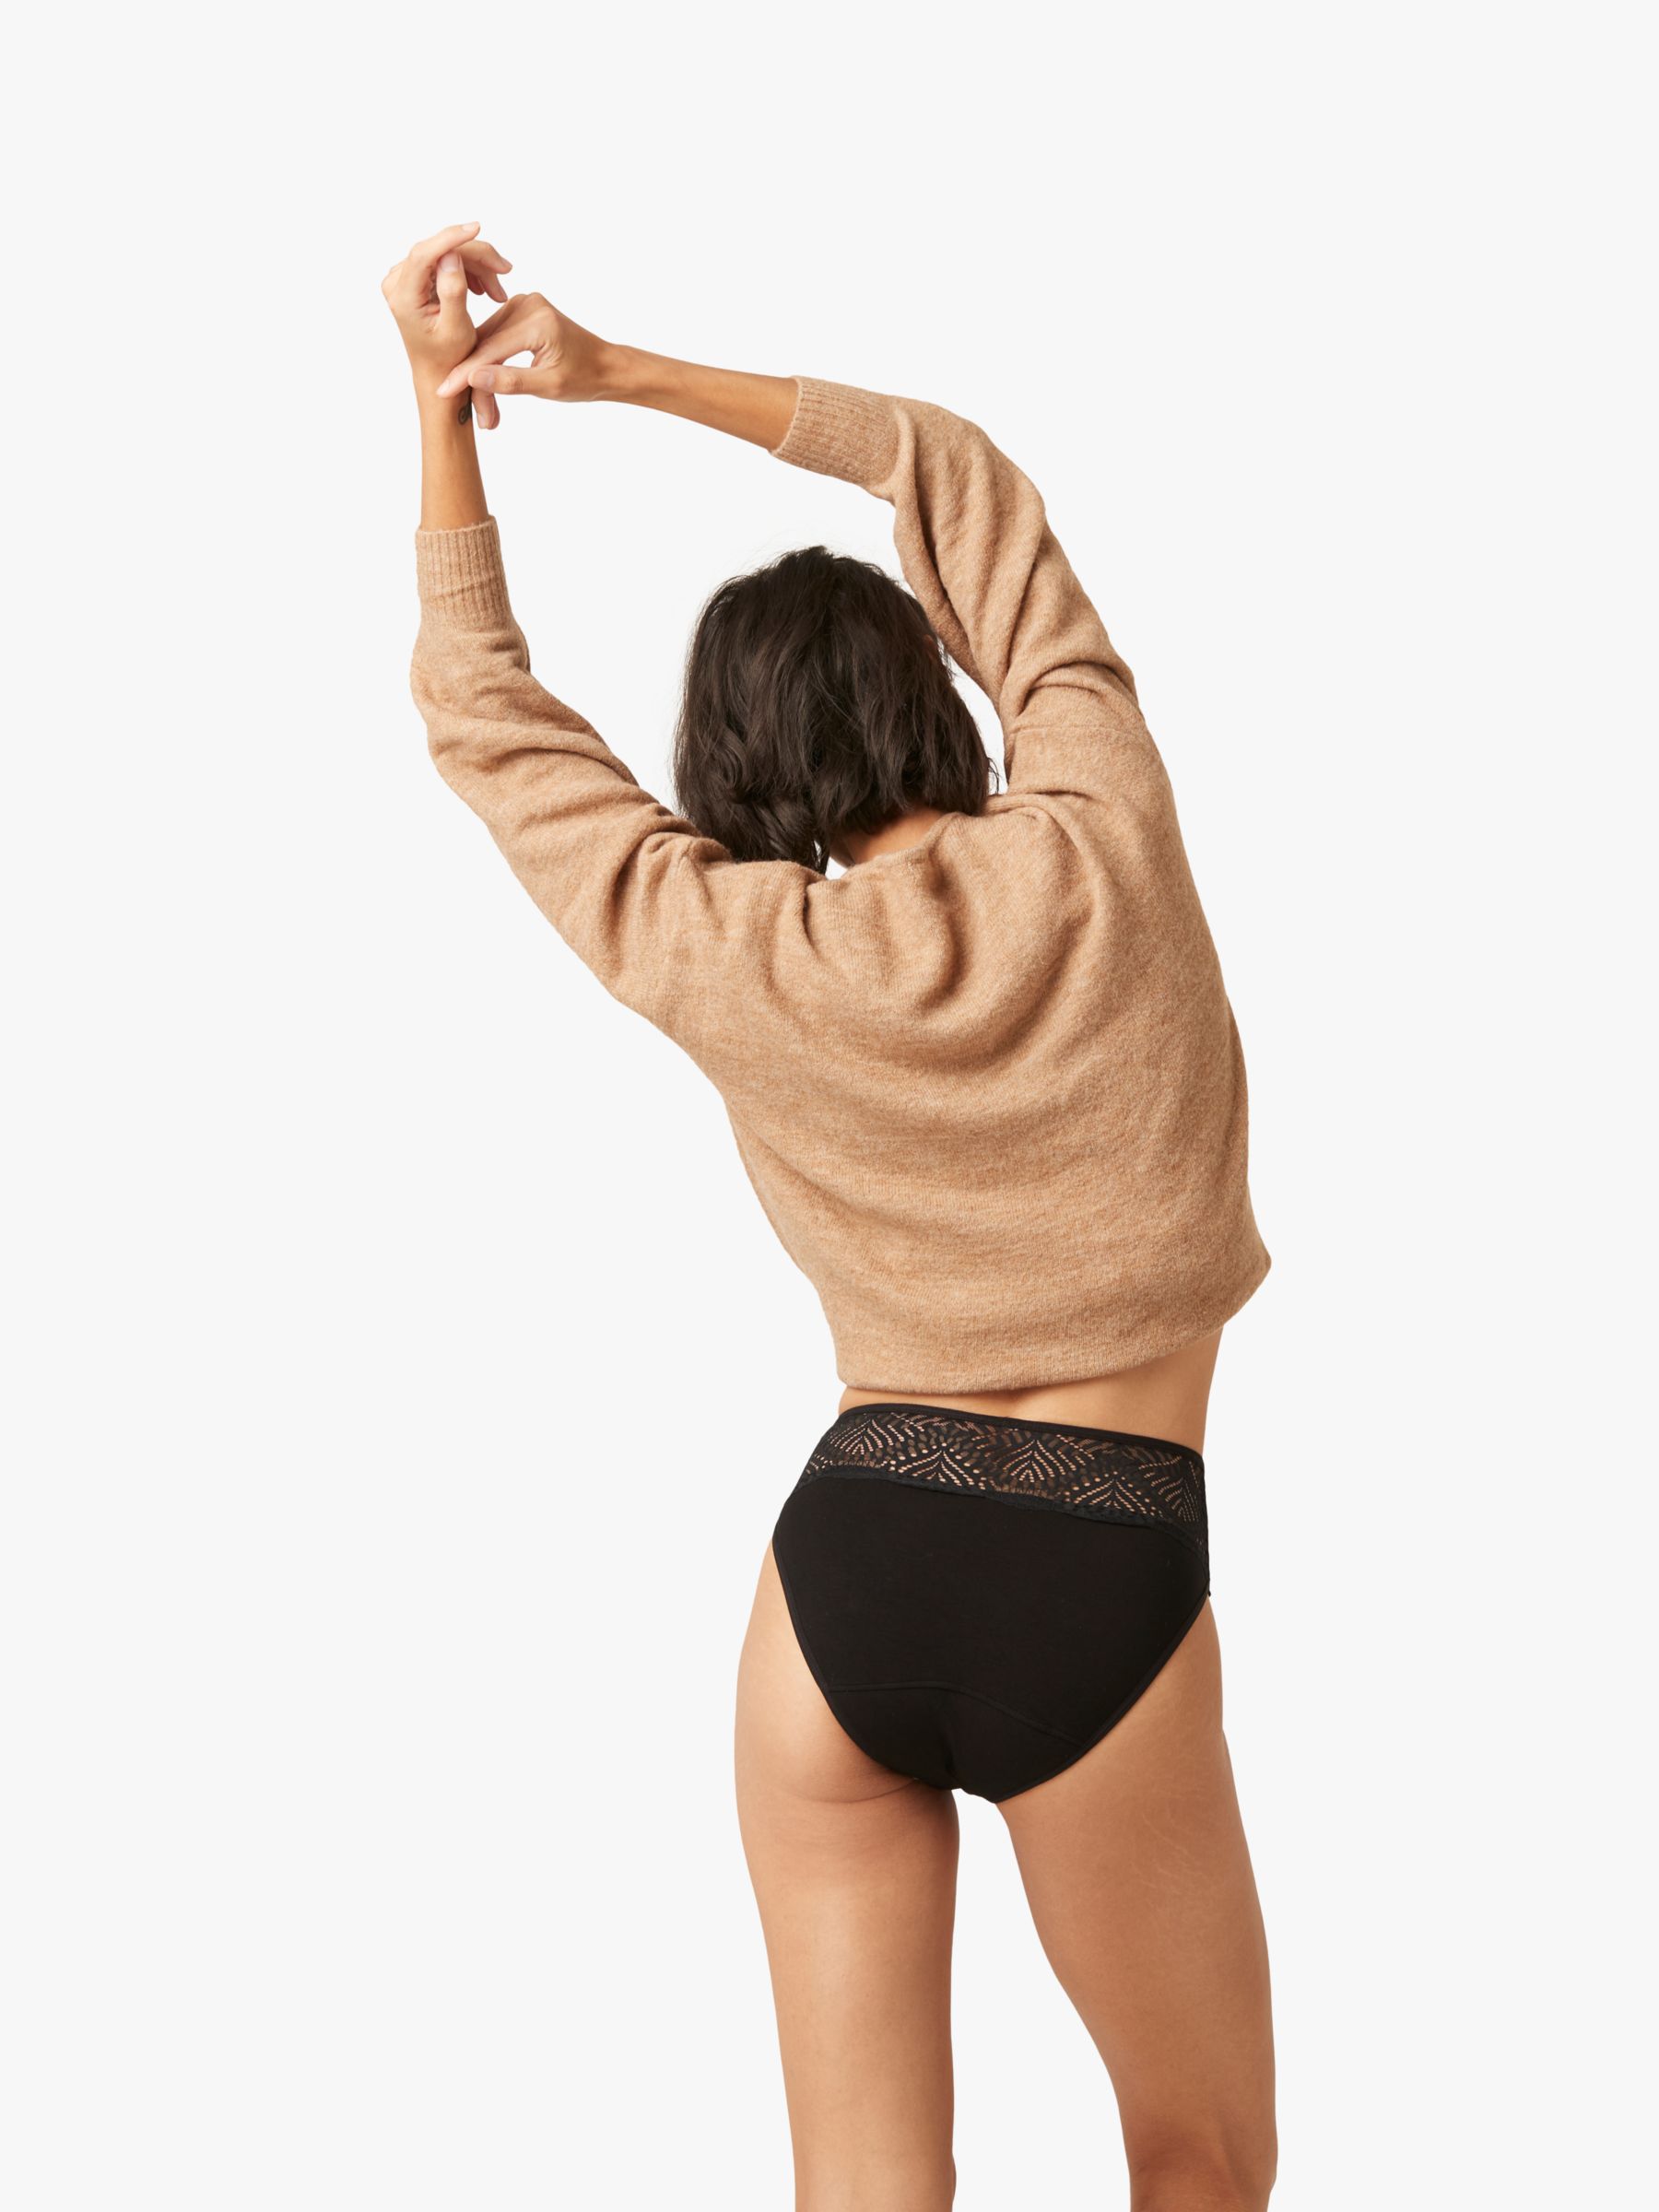 Modibodi Sensual French Cut Moderate to Heavy Absorbency Knickers, Black at  John Lewis & Partners